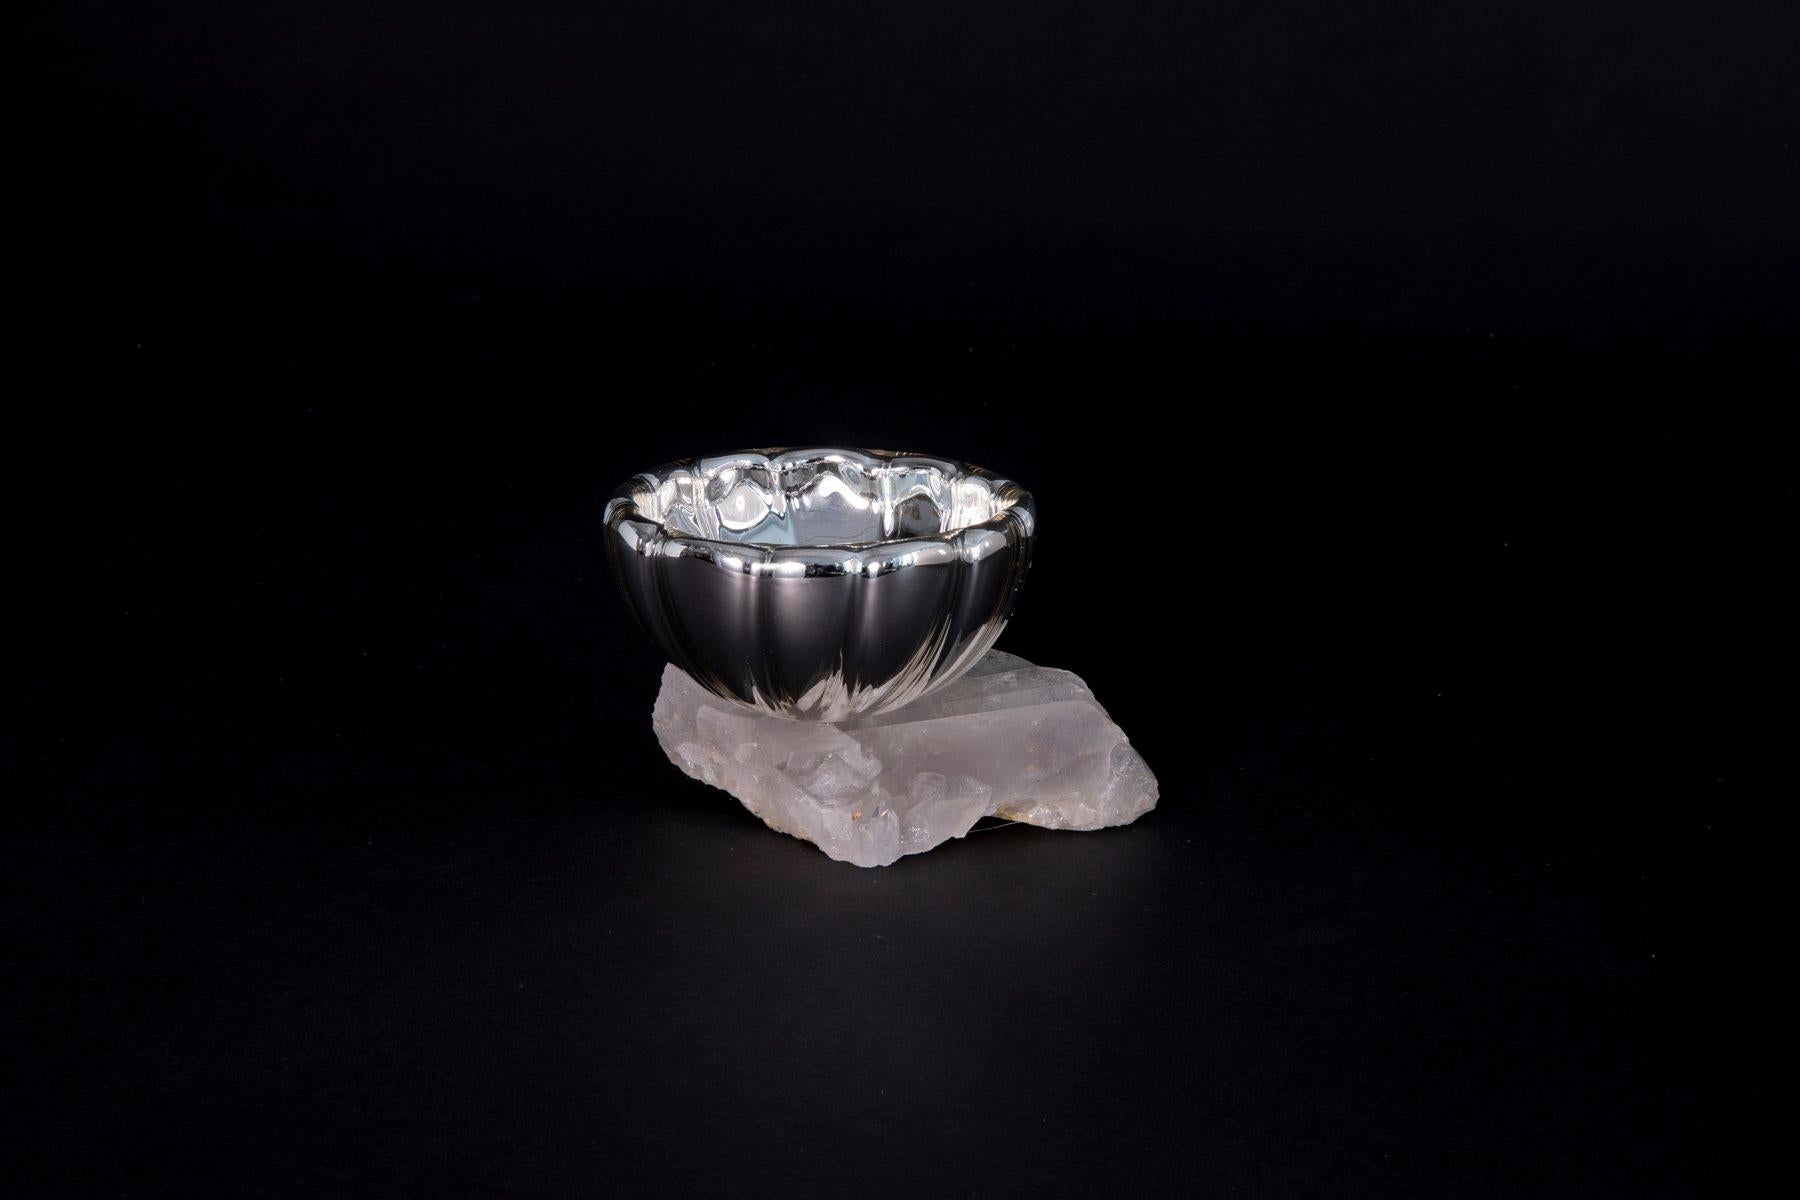 This flawless glass bowl is chemically bound to some of earth's most beautiful treasures. The textural contrast between these two bodies is what makes the piece so striking. When something is placed in the bowl the reflective quality of the interior